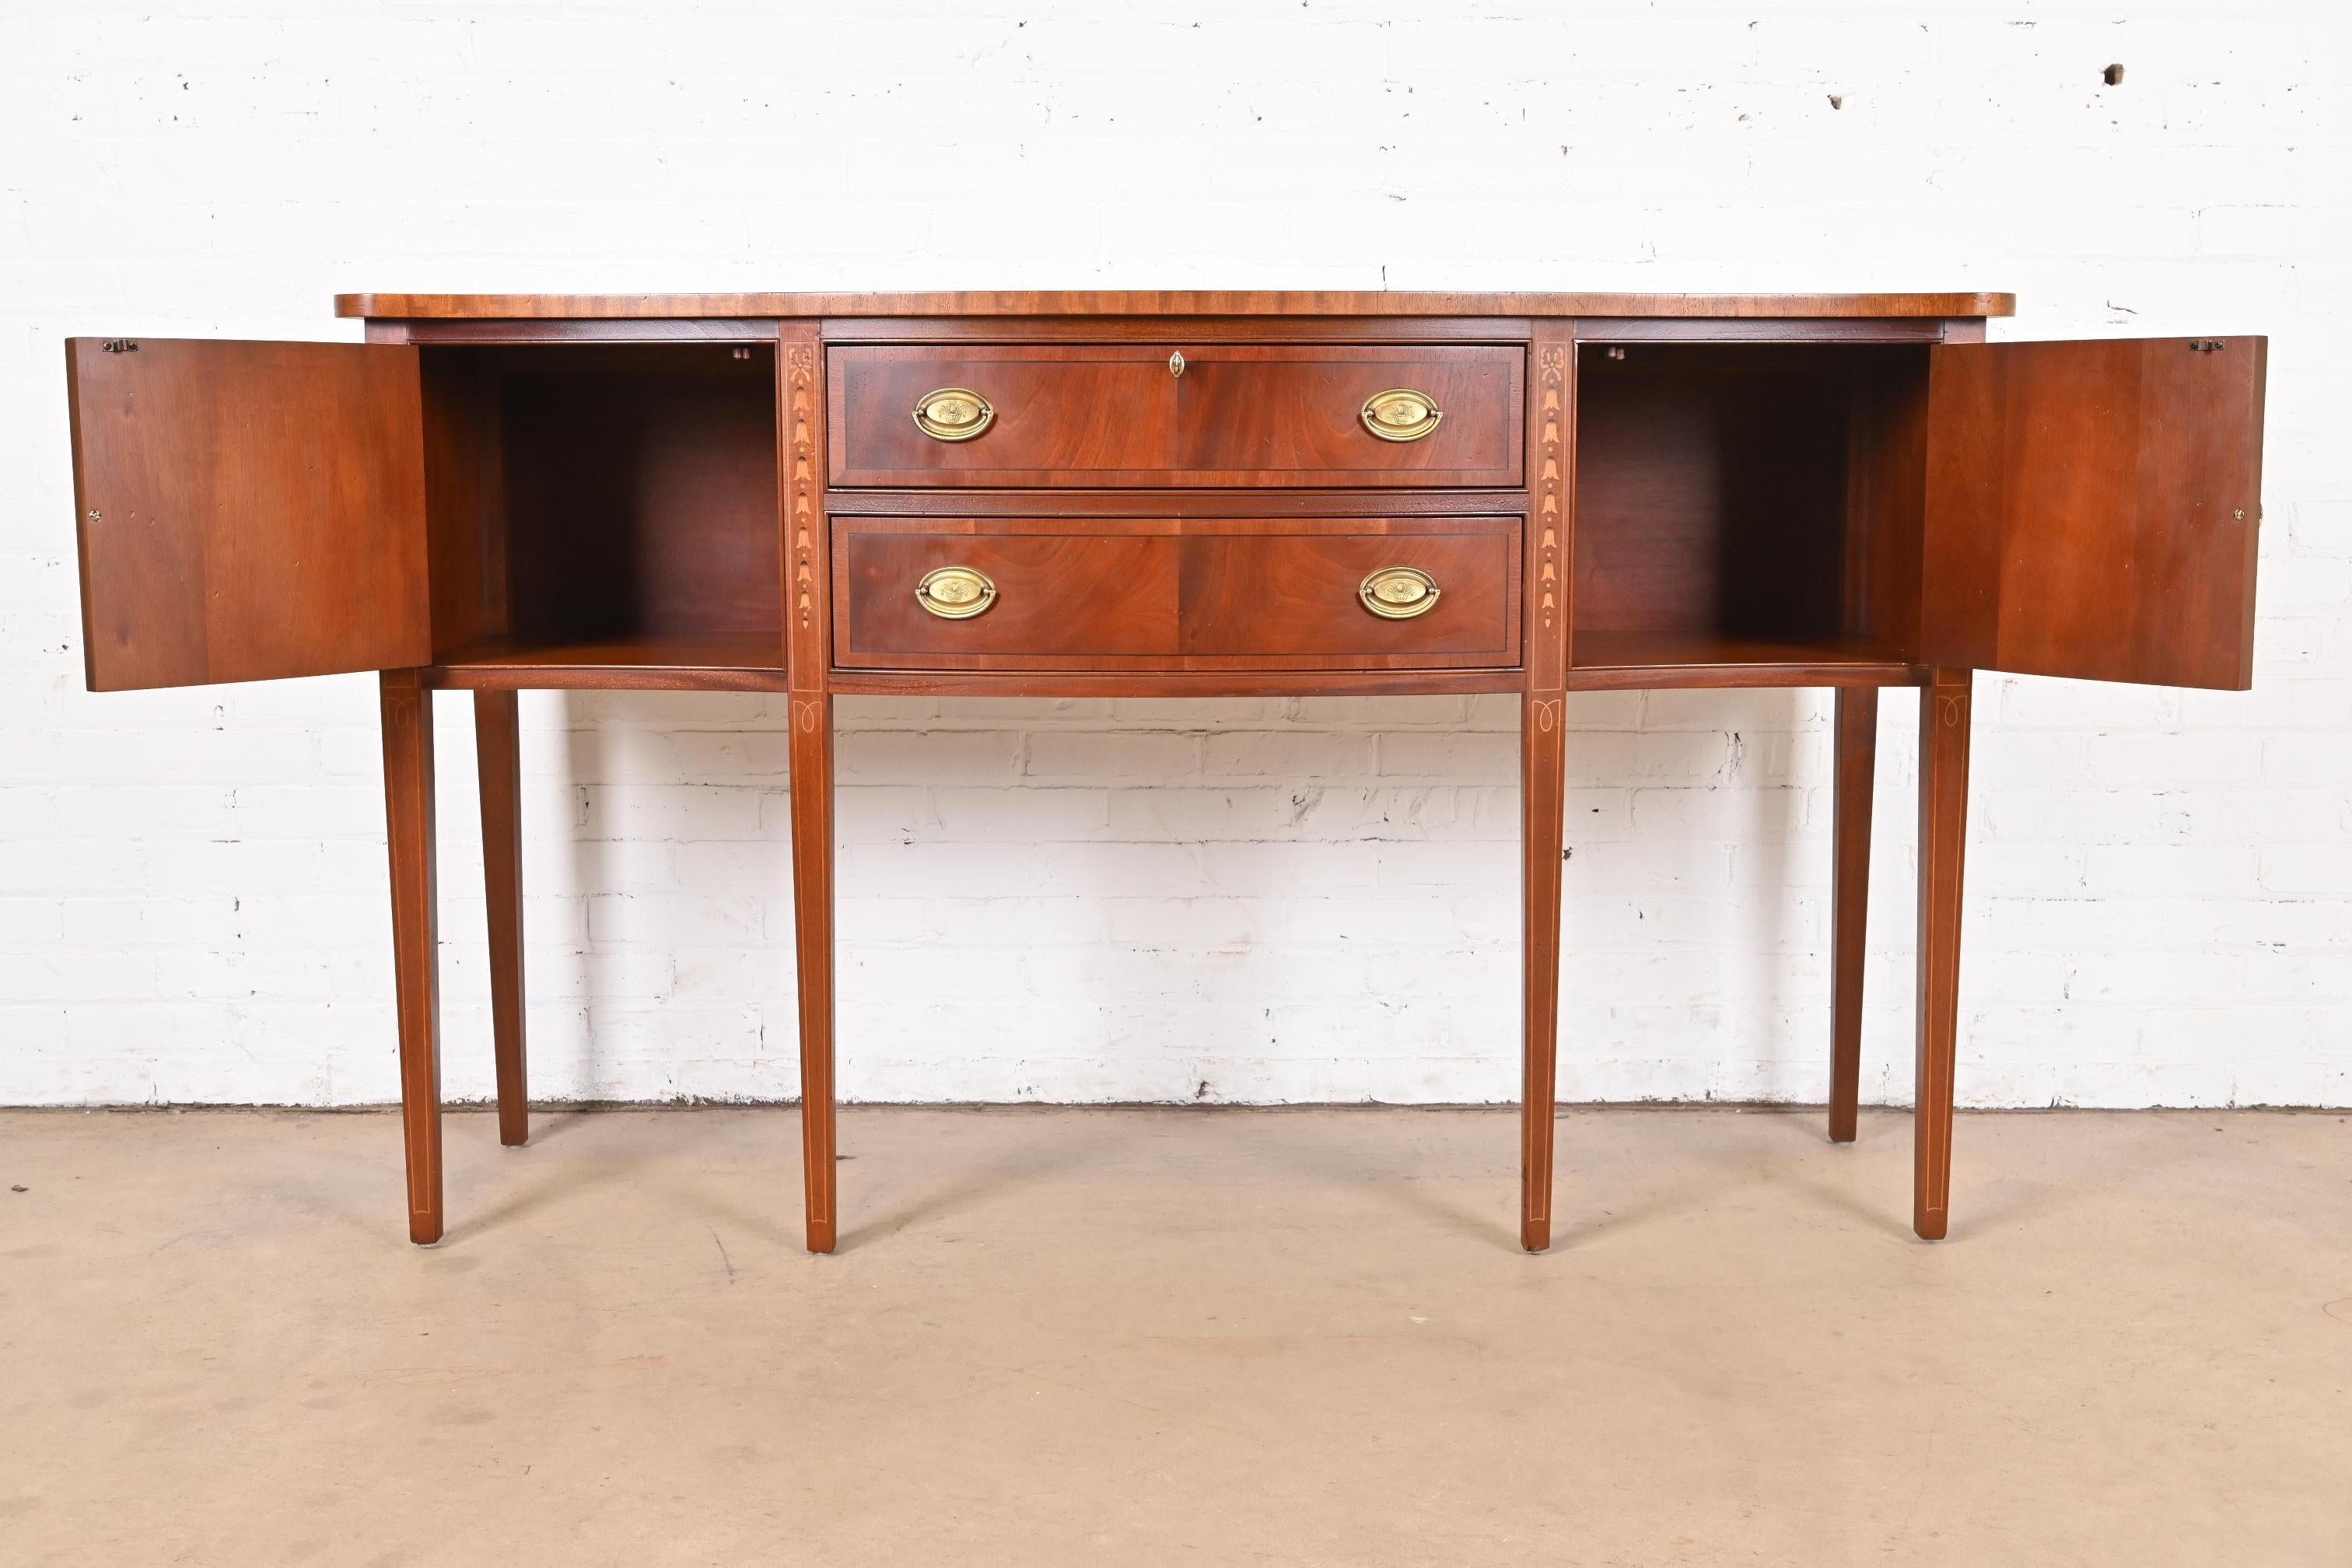 Hepplewhite Inlaid Mahogany Serpentine Front Sideboard Buffet or Credenza For Sale 8